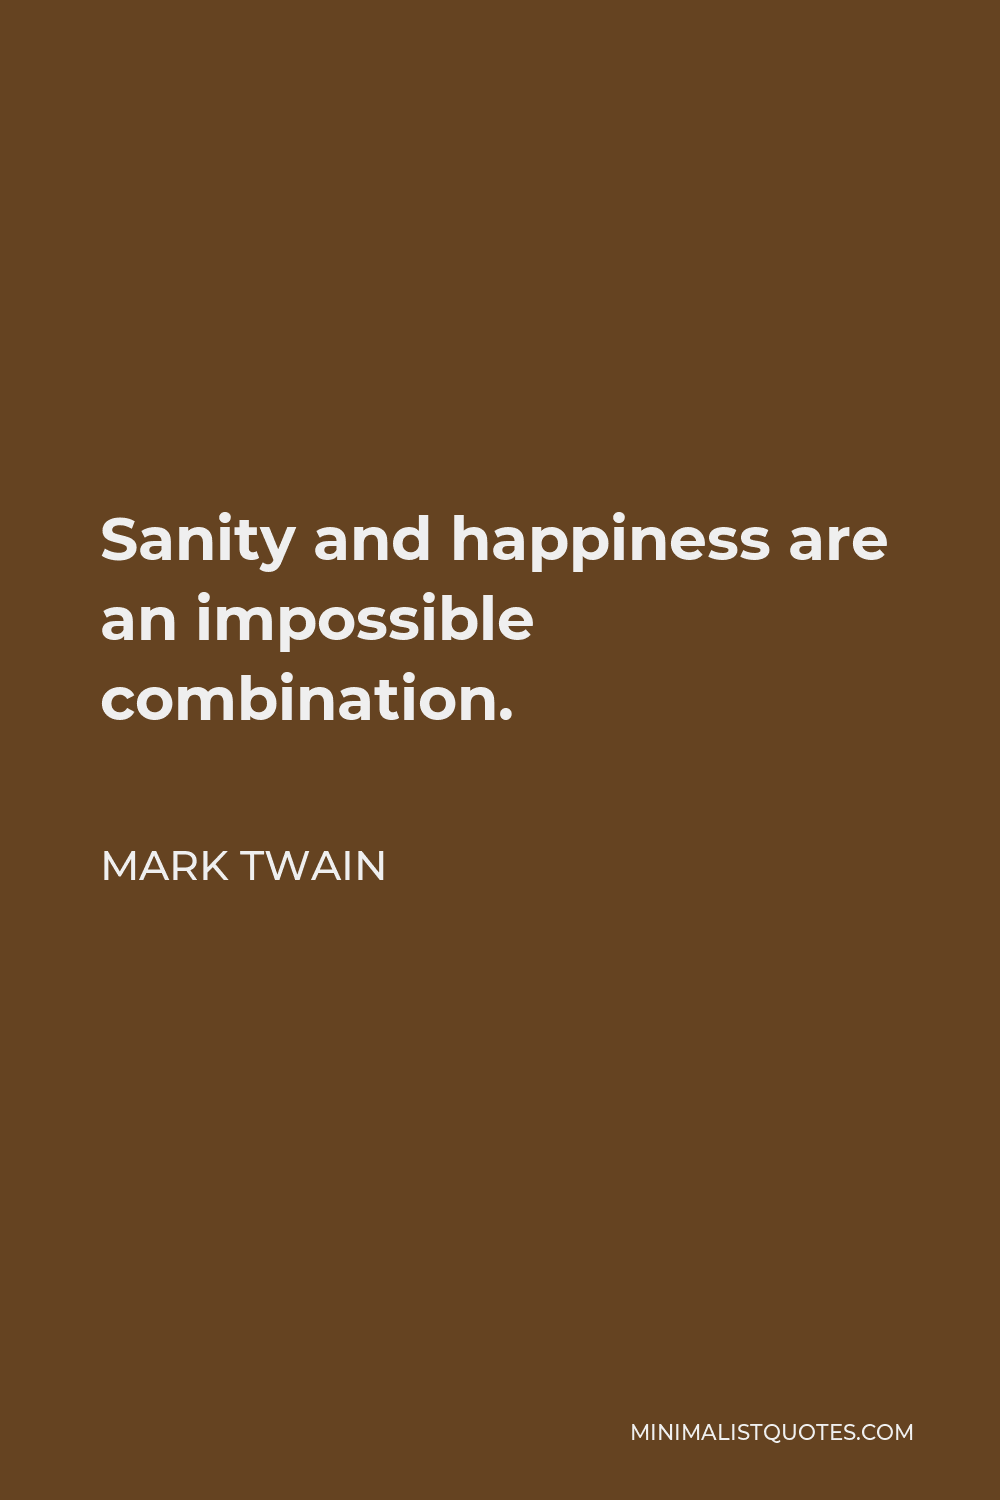 Mark Twain Quote - Sanity and happiness are an impossible combination.